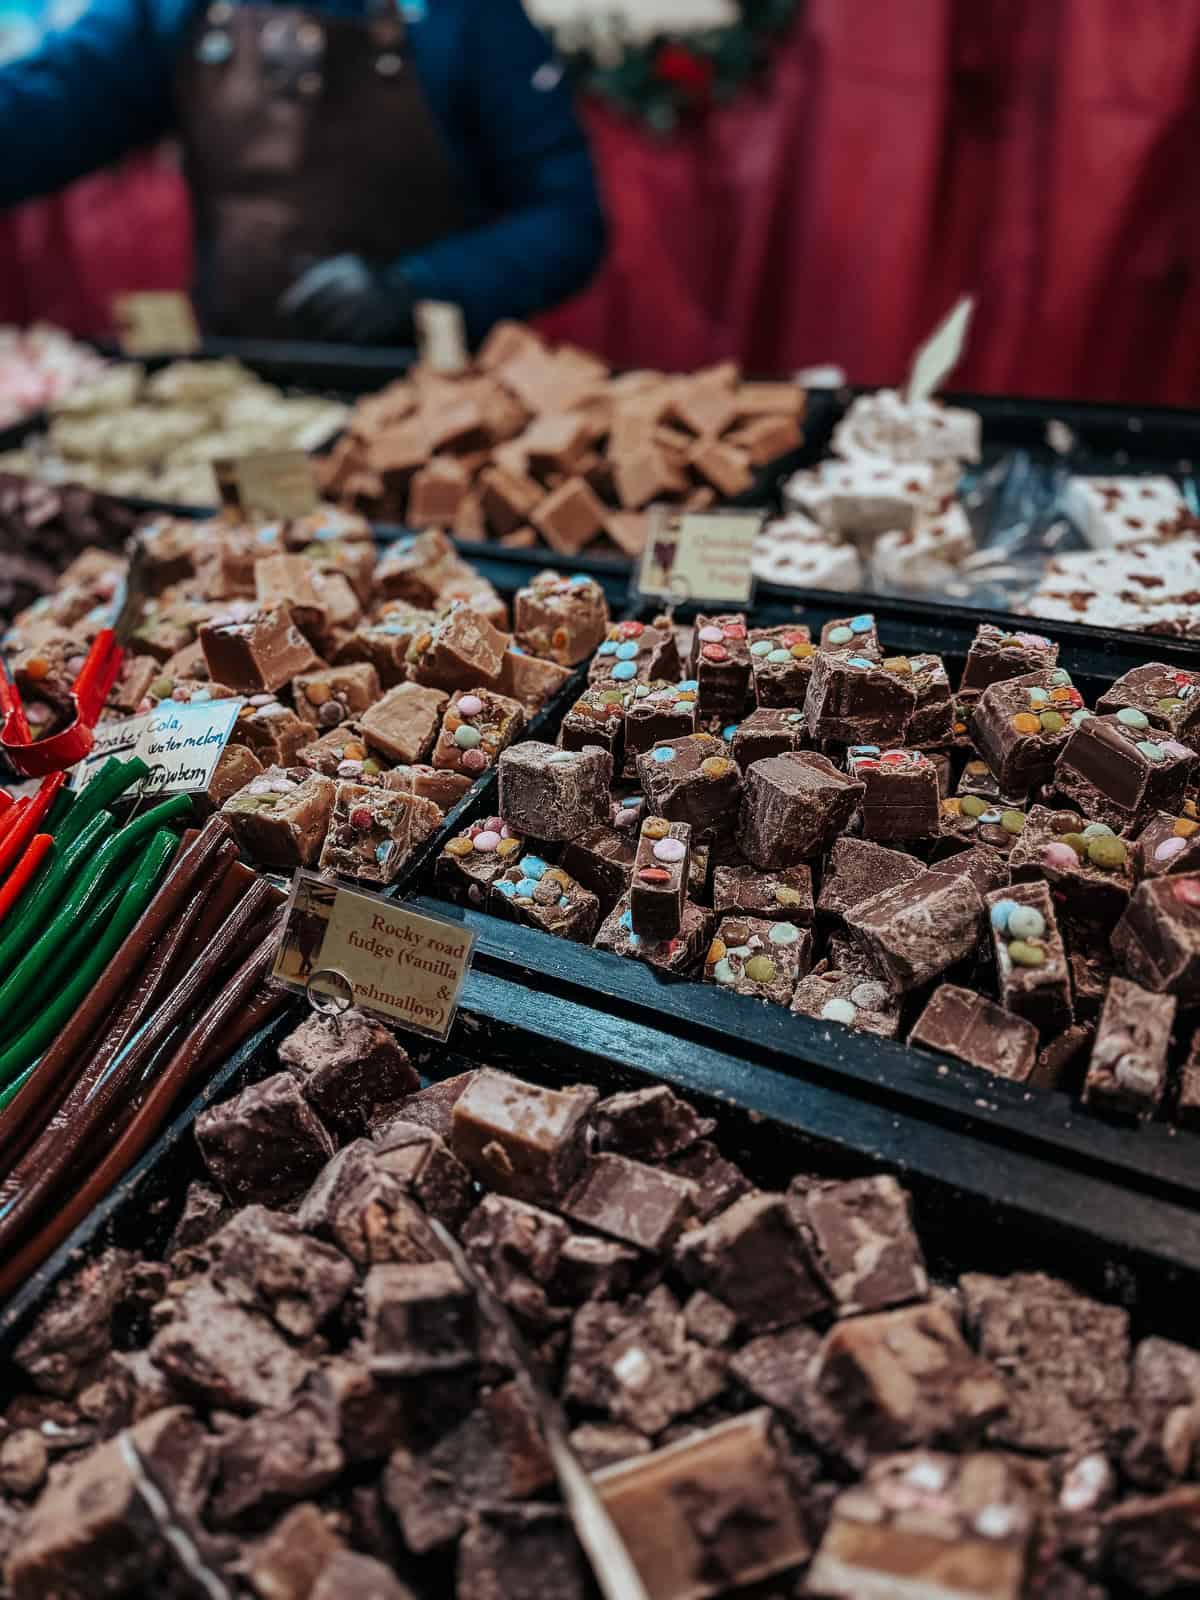 A close-up of various types of fudge, including chocolate, rocky road, and other candy-topped selections, displayed in a market stall with a vendor in the background.